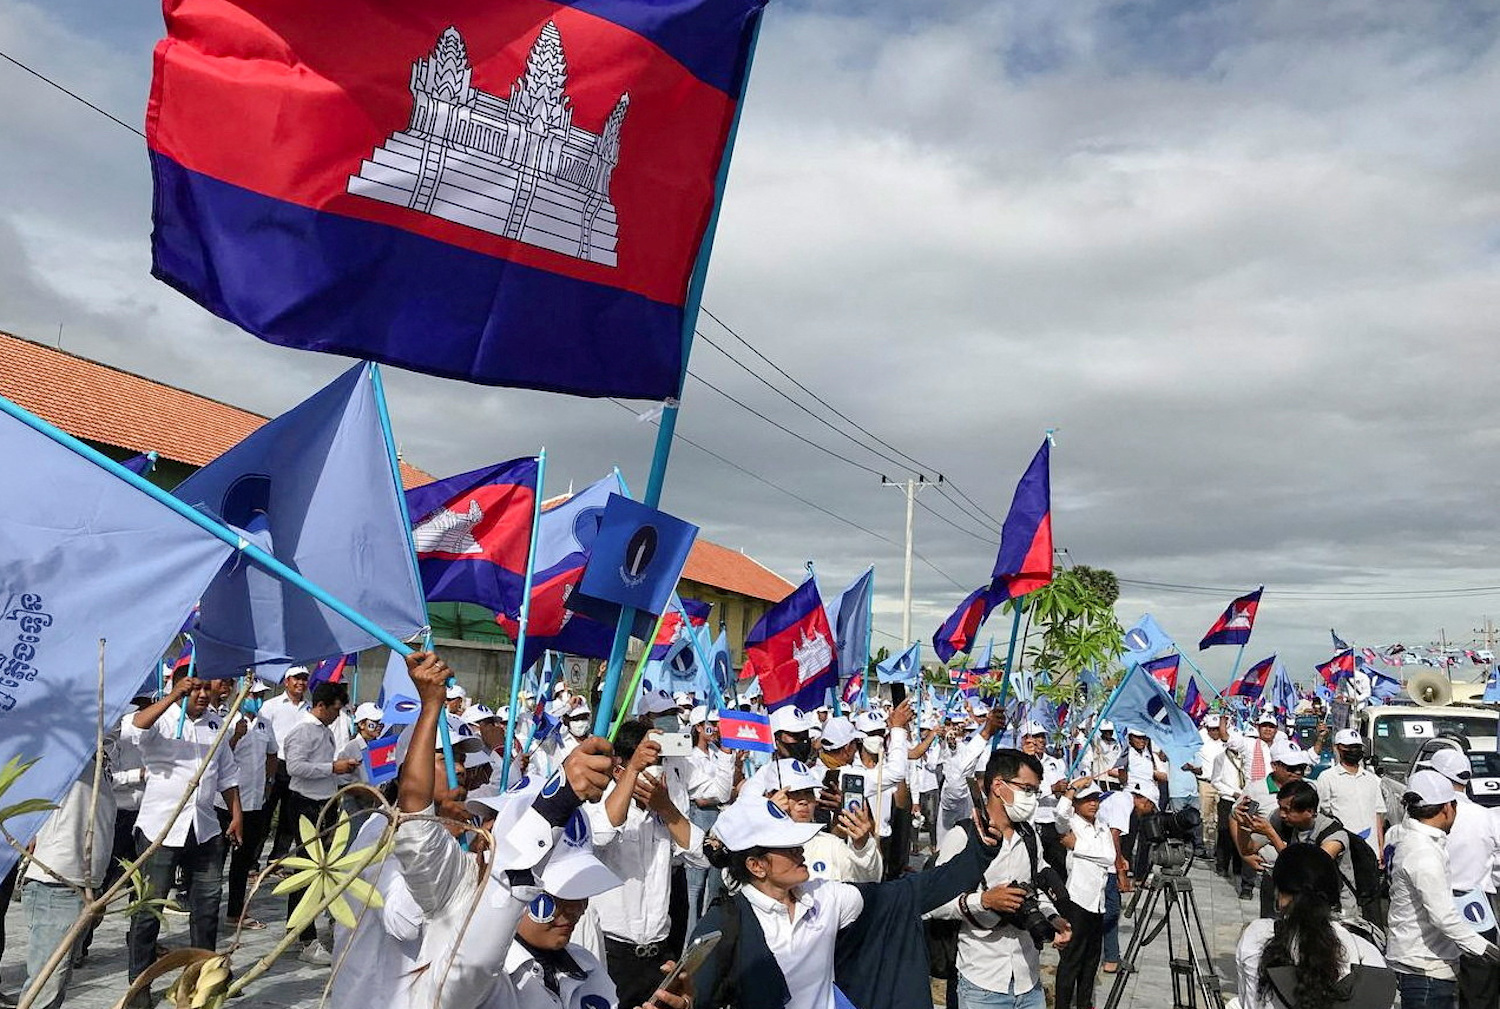 Cambodia's Opposition Party Banned, Hun Sen To Run Unopposed